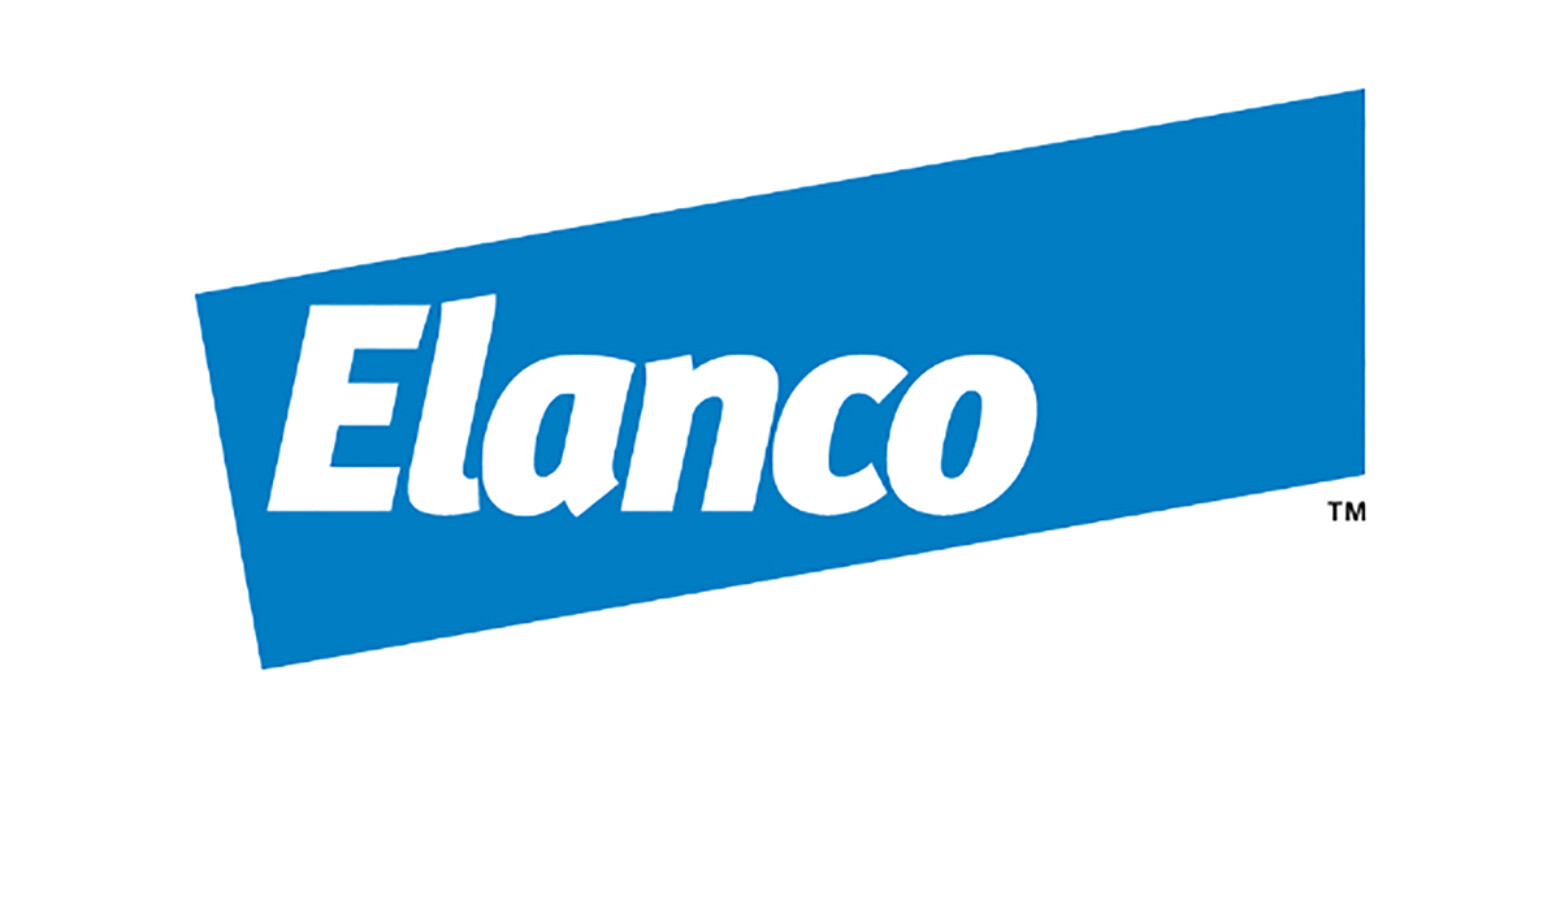 Elanco will invest more than $300 million in its Indiana operations, further increasing the company’s presence in the state. (Courtesy of Elanco)